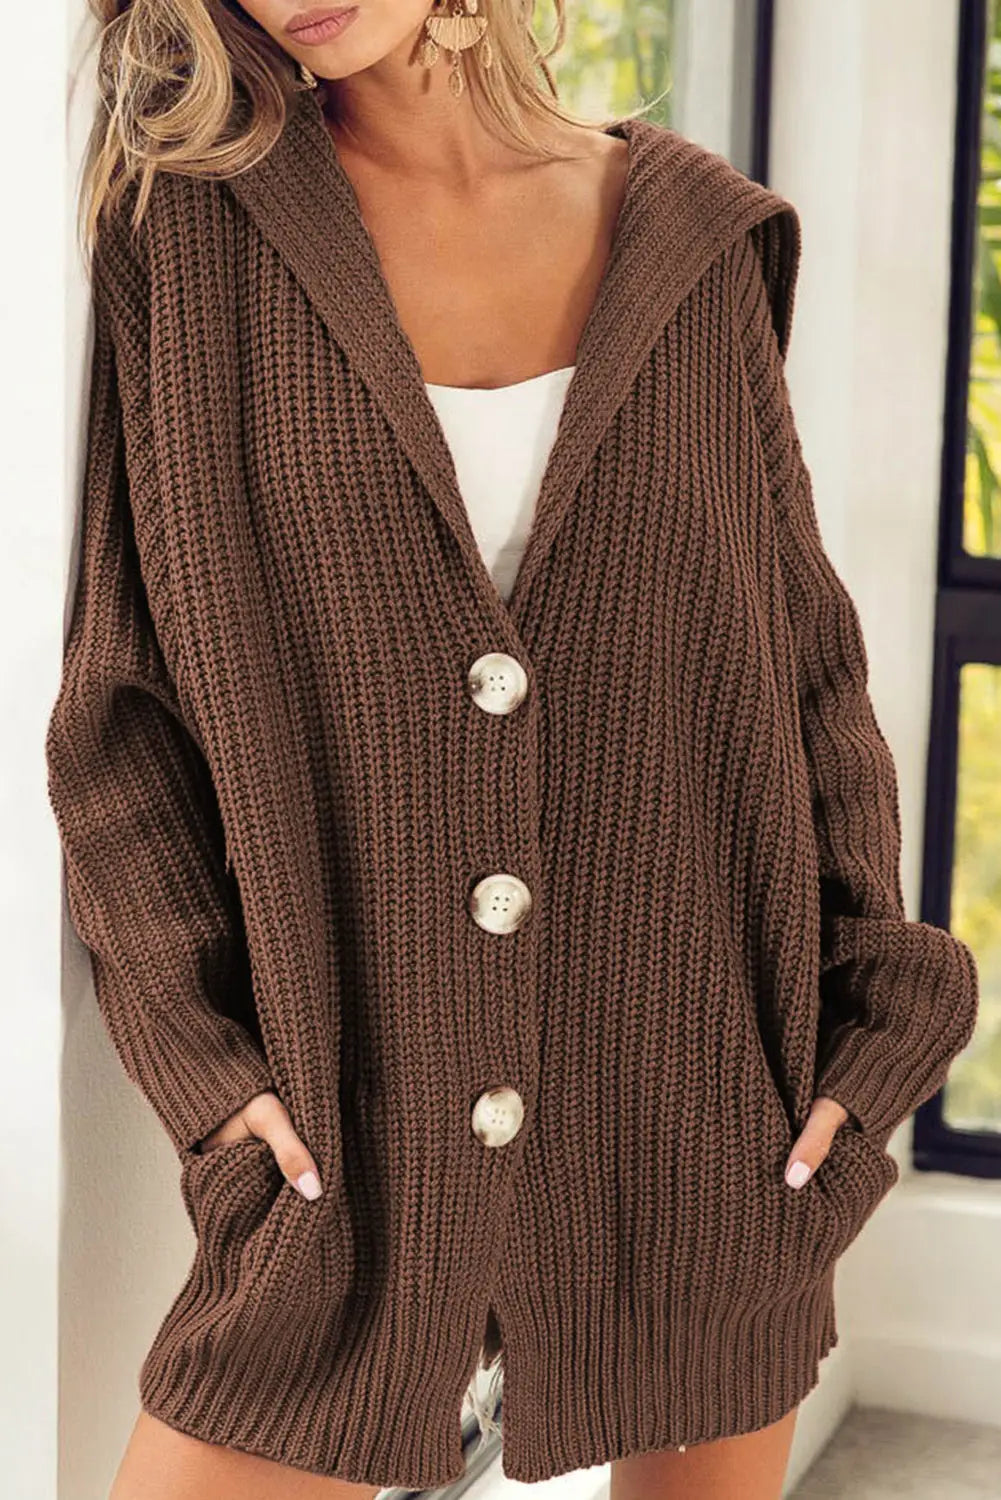 Brown chunky knit lapel collar button up cardigan - s / 100% acrylic - sweaters & cardigans